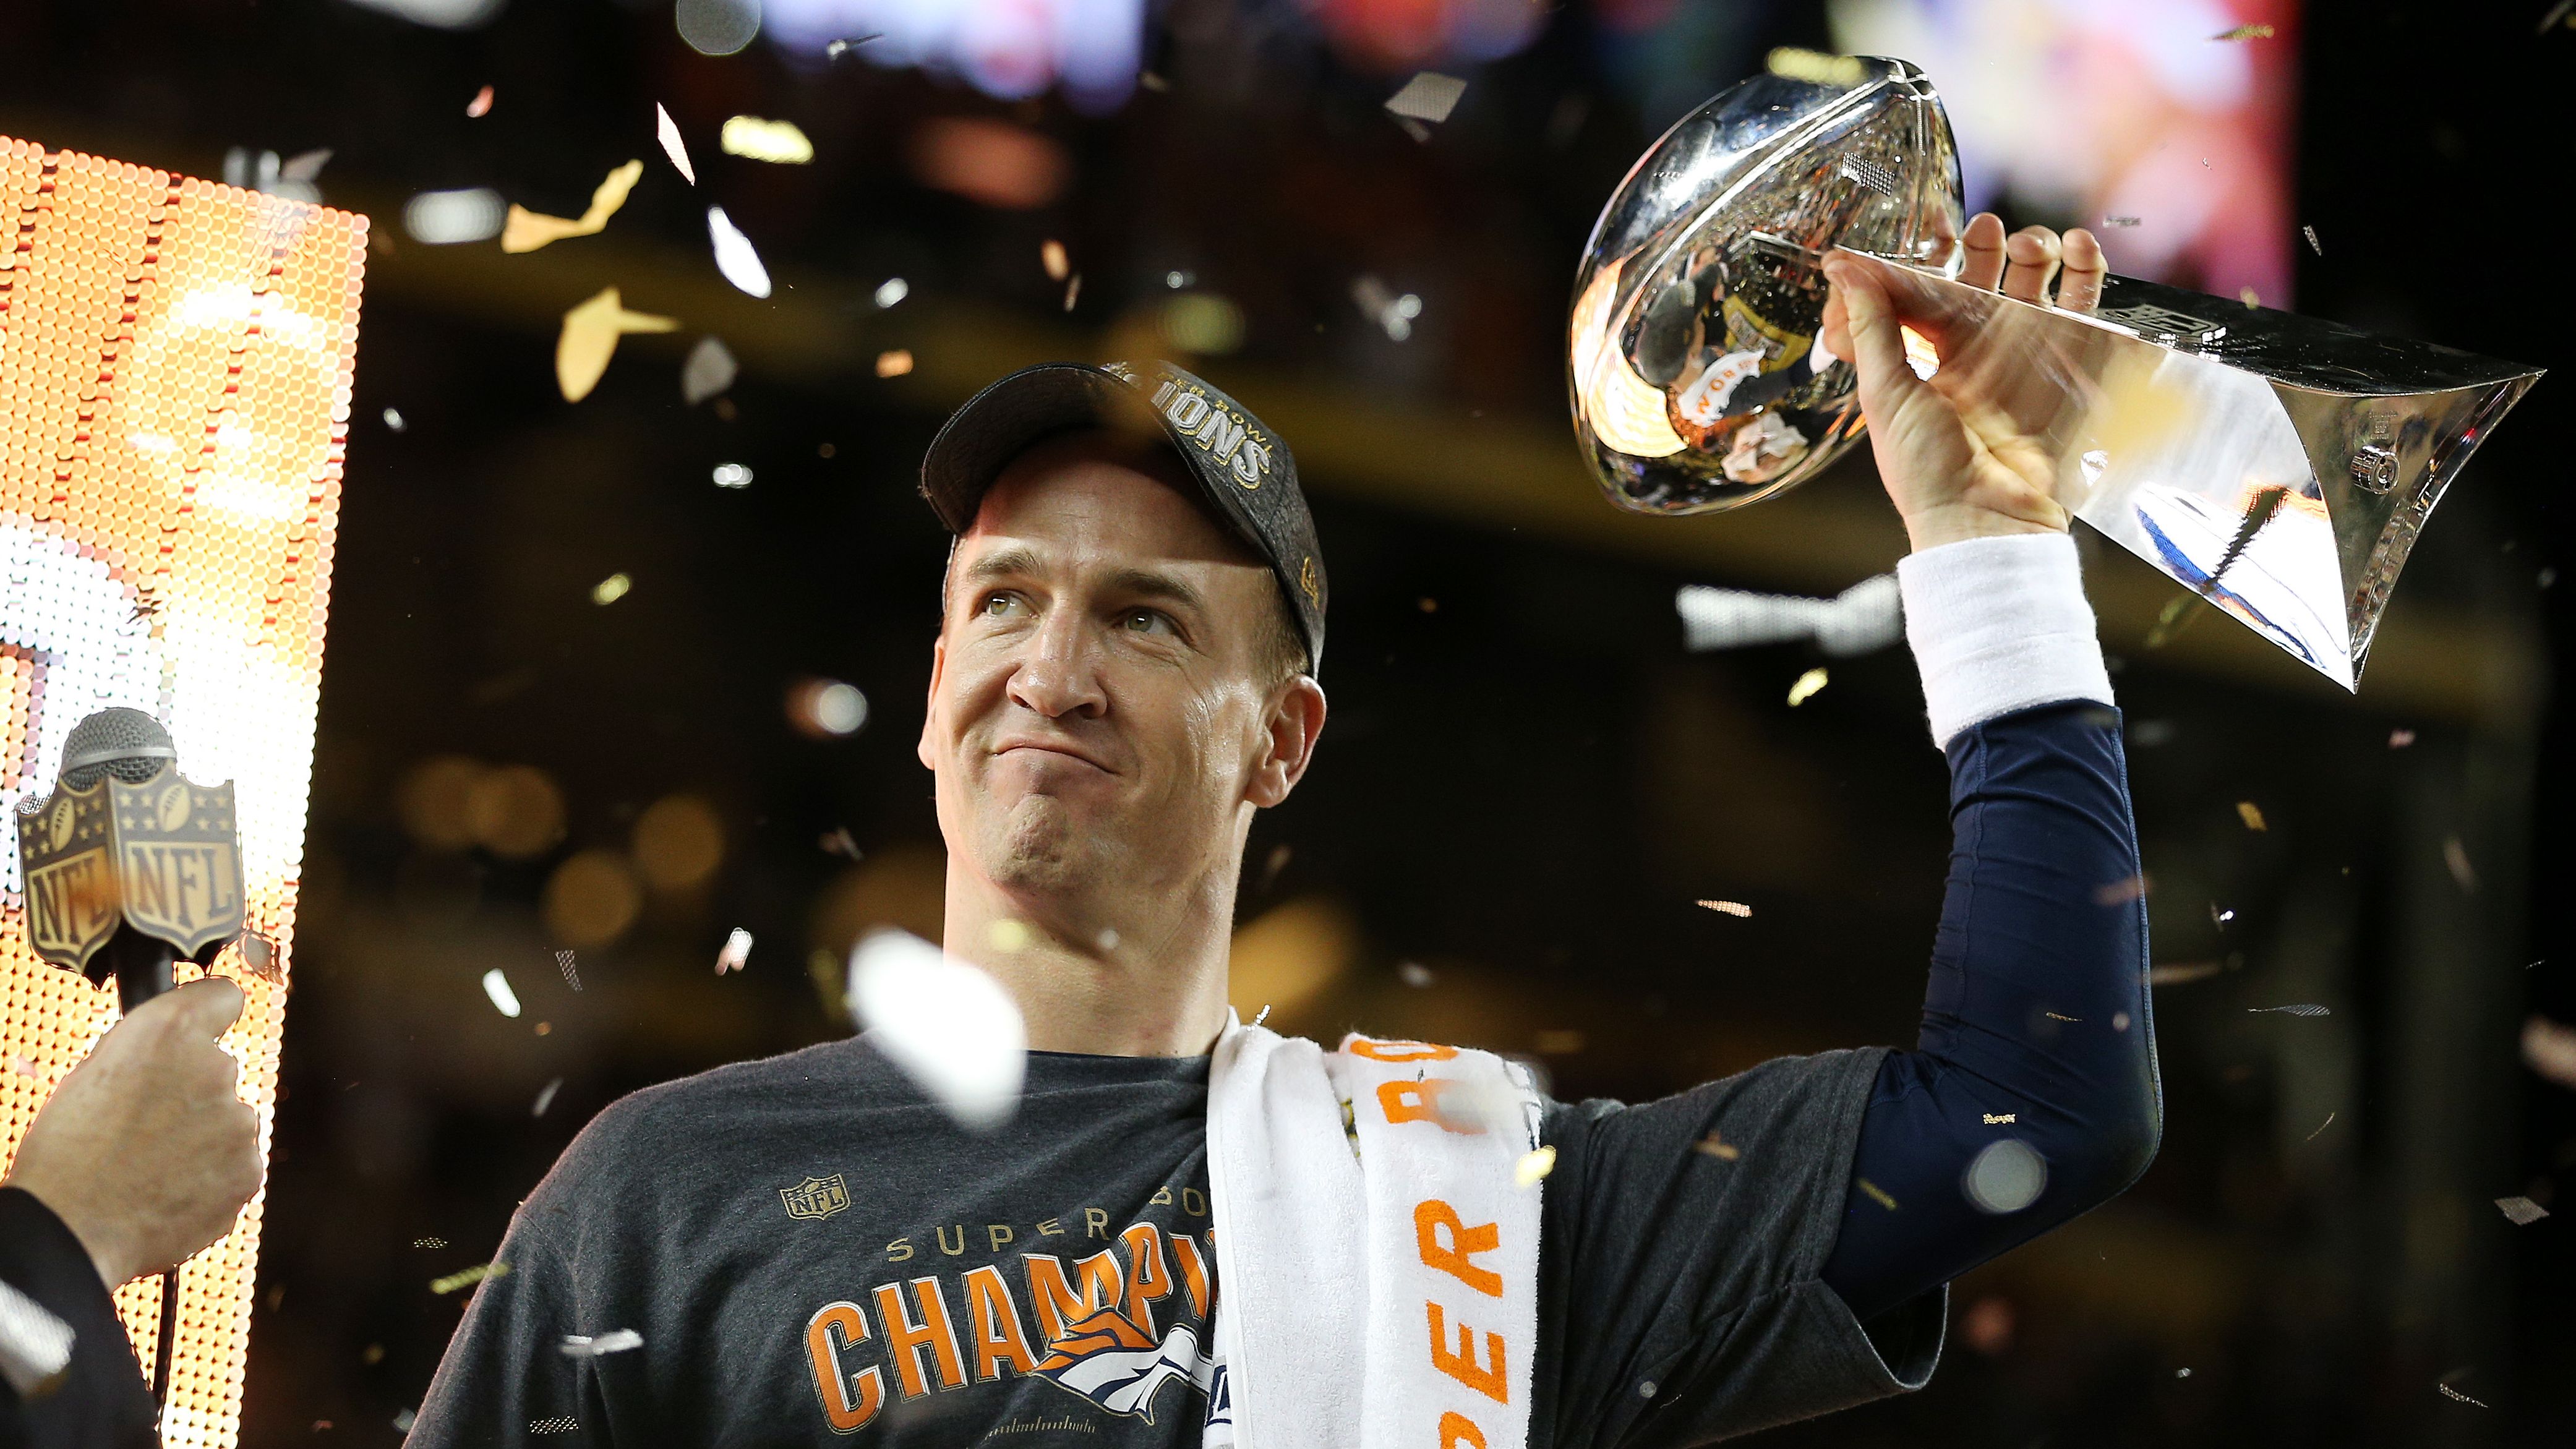 Peyton Manning #18 of the Denver Broncos celebrates with the Vince Lombardi Trophy after Super Bowl 50 at Levi's Stadium on February 7, 2016, in Santa Clara, California. The Broncos defeated the Panthers 24-10. 